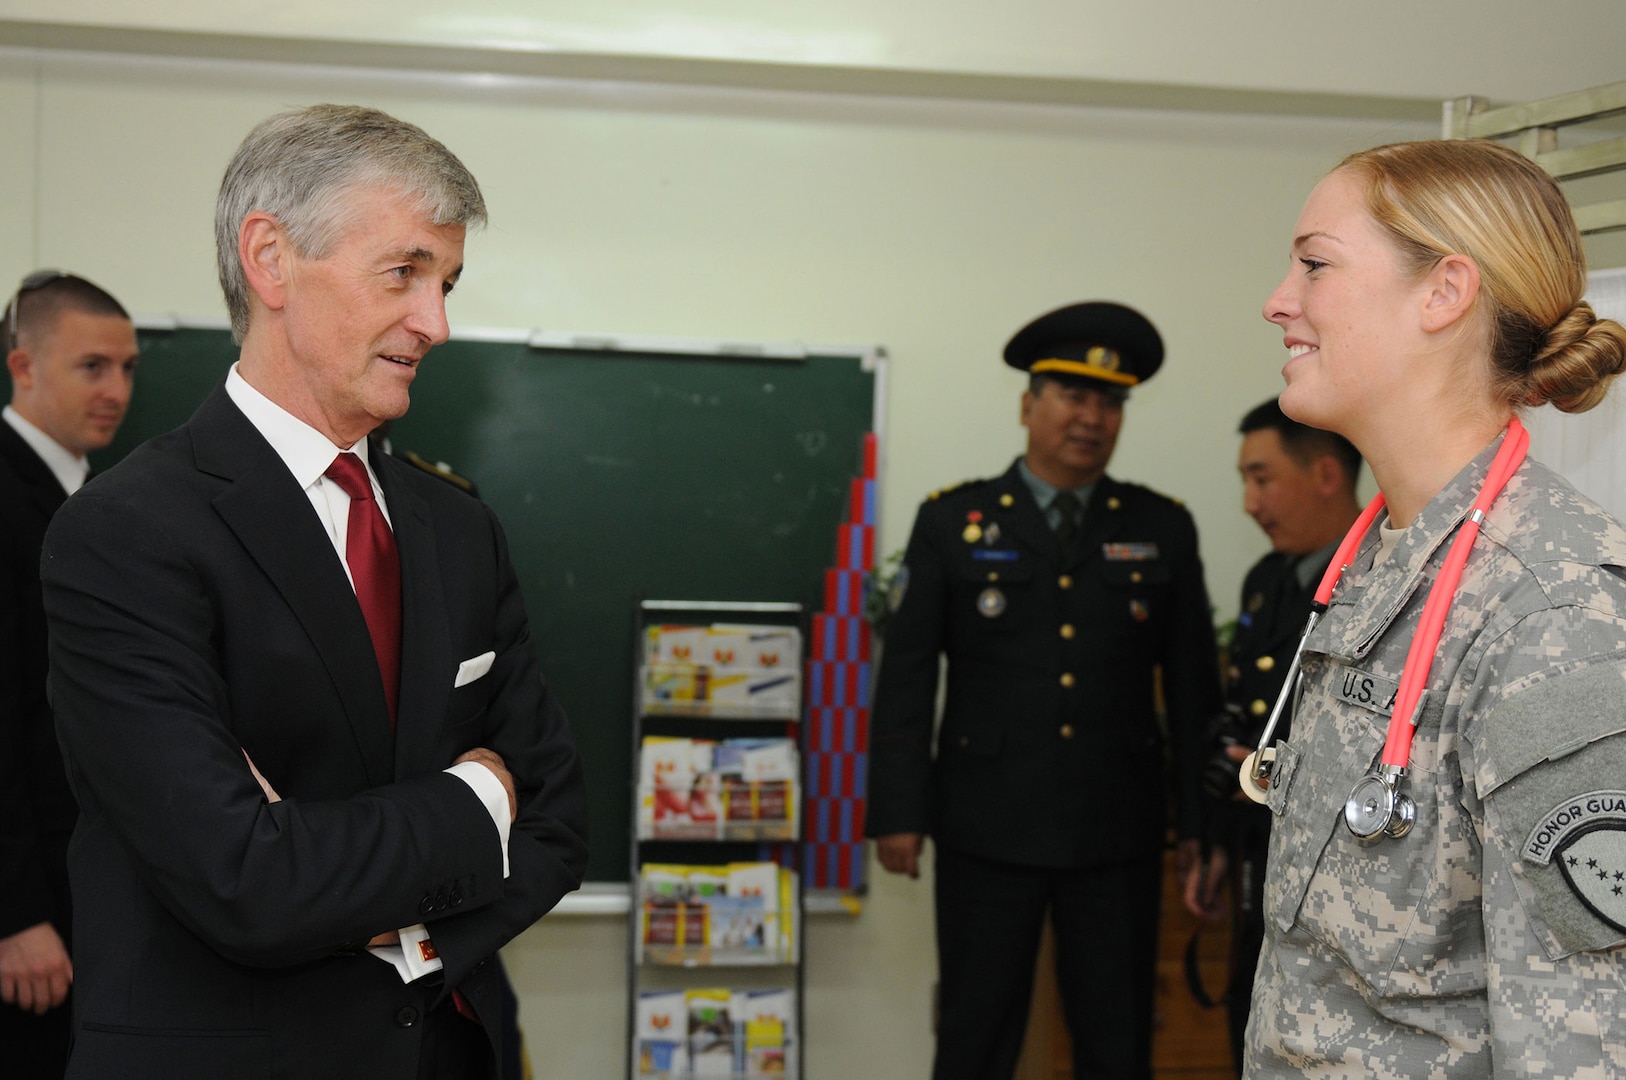 Secretary of the Army John M. McHugh talks with Army Pfc. Chantal Miller, a medic with the Alaska Army National Guard's Medical Detachment, during his visit of the various Khaan Quest 12 exercise locations in and around Ulaanbaatar, Mongolia, Aug. 14. Khaan Quest is a regularly scheduled, multinational exercise sponsored by the U.S. Army, Pacific and hosted annually by the Mongolian Armed Forces.